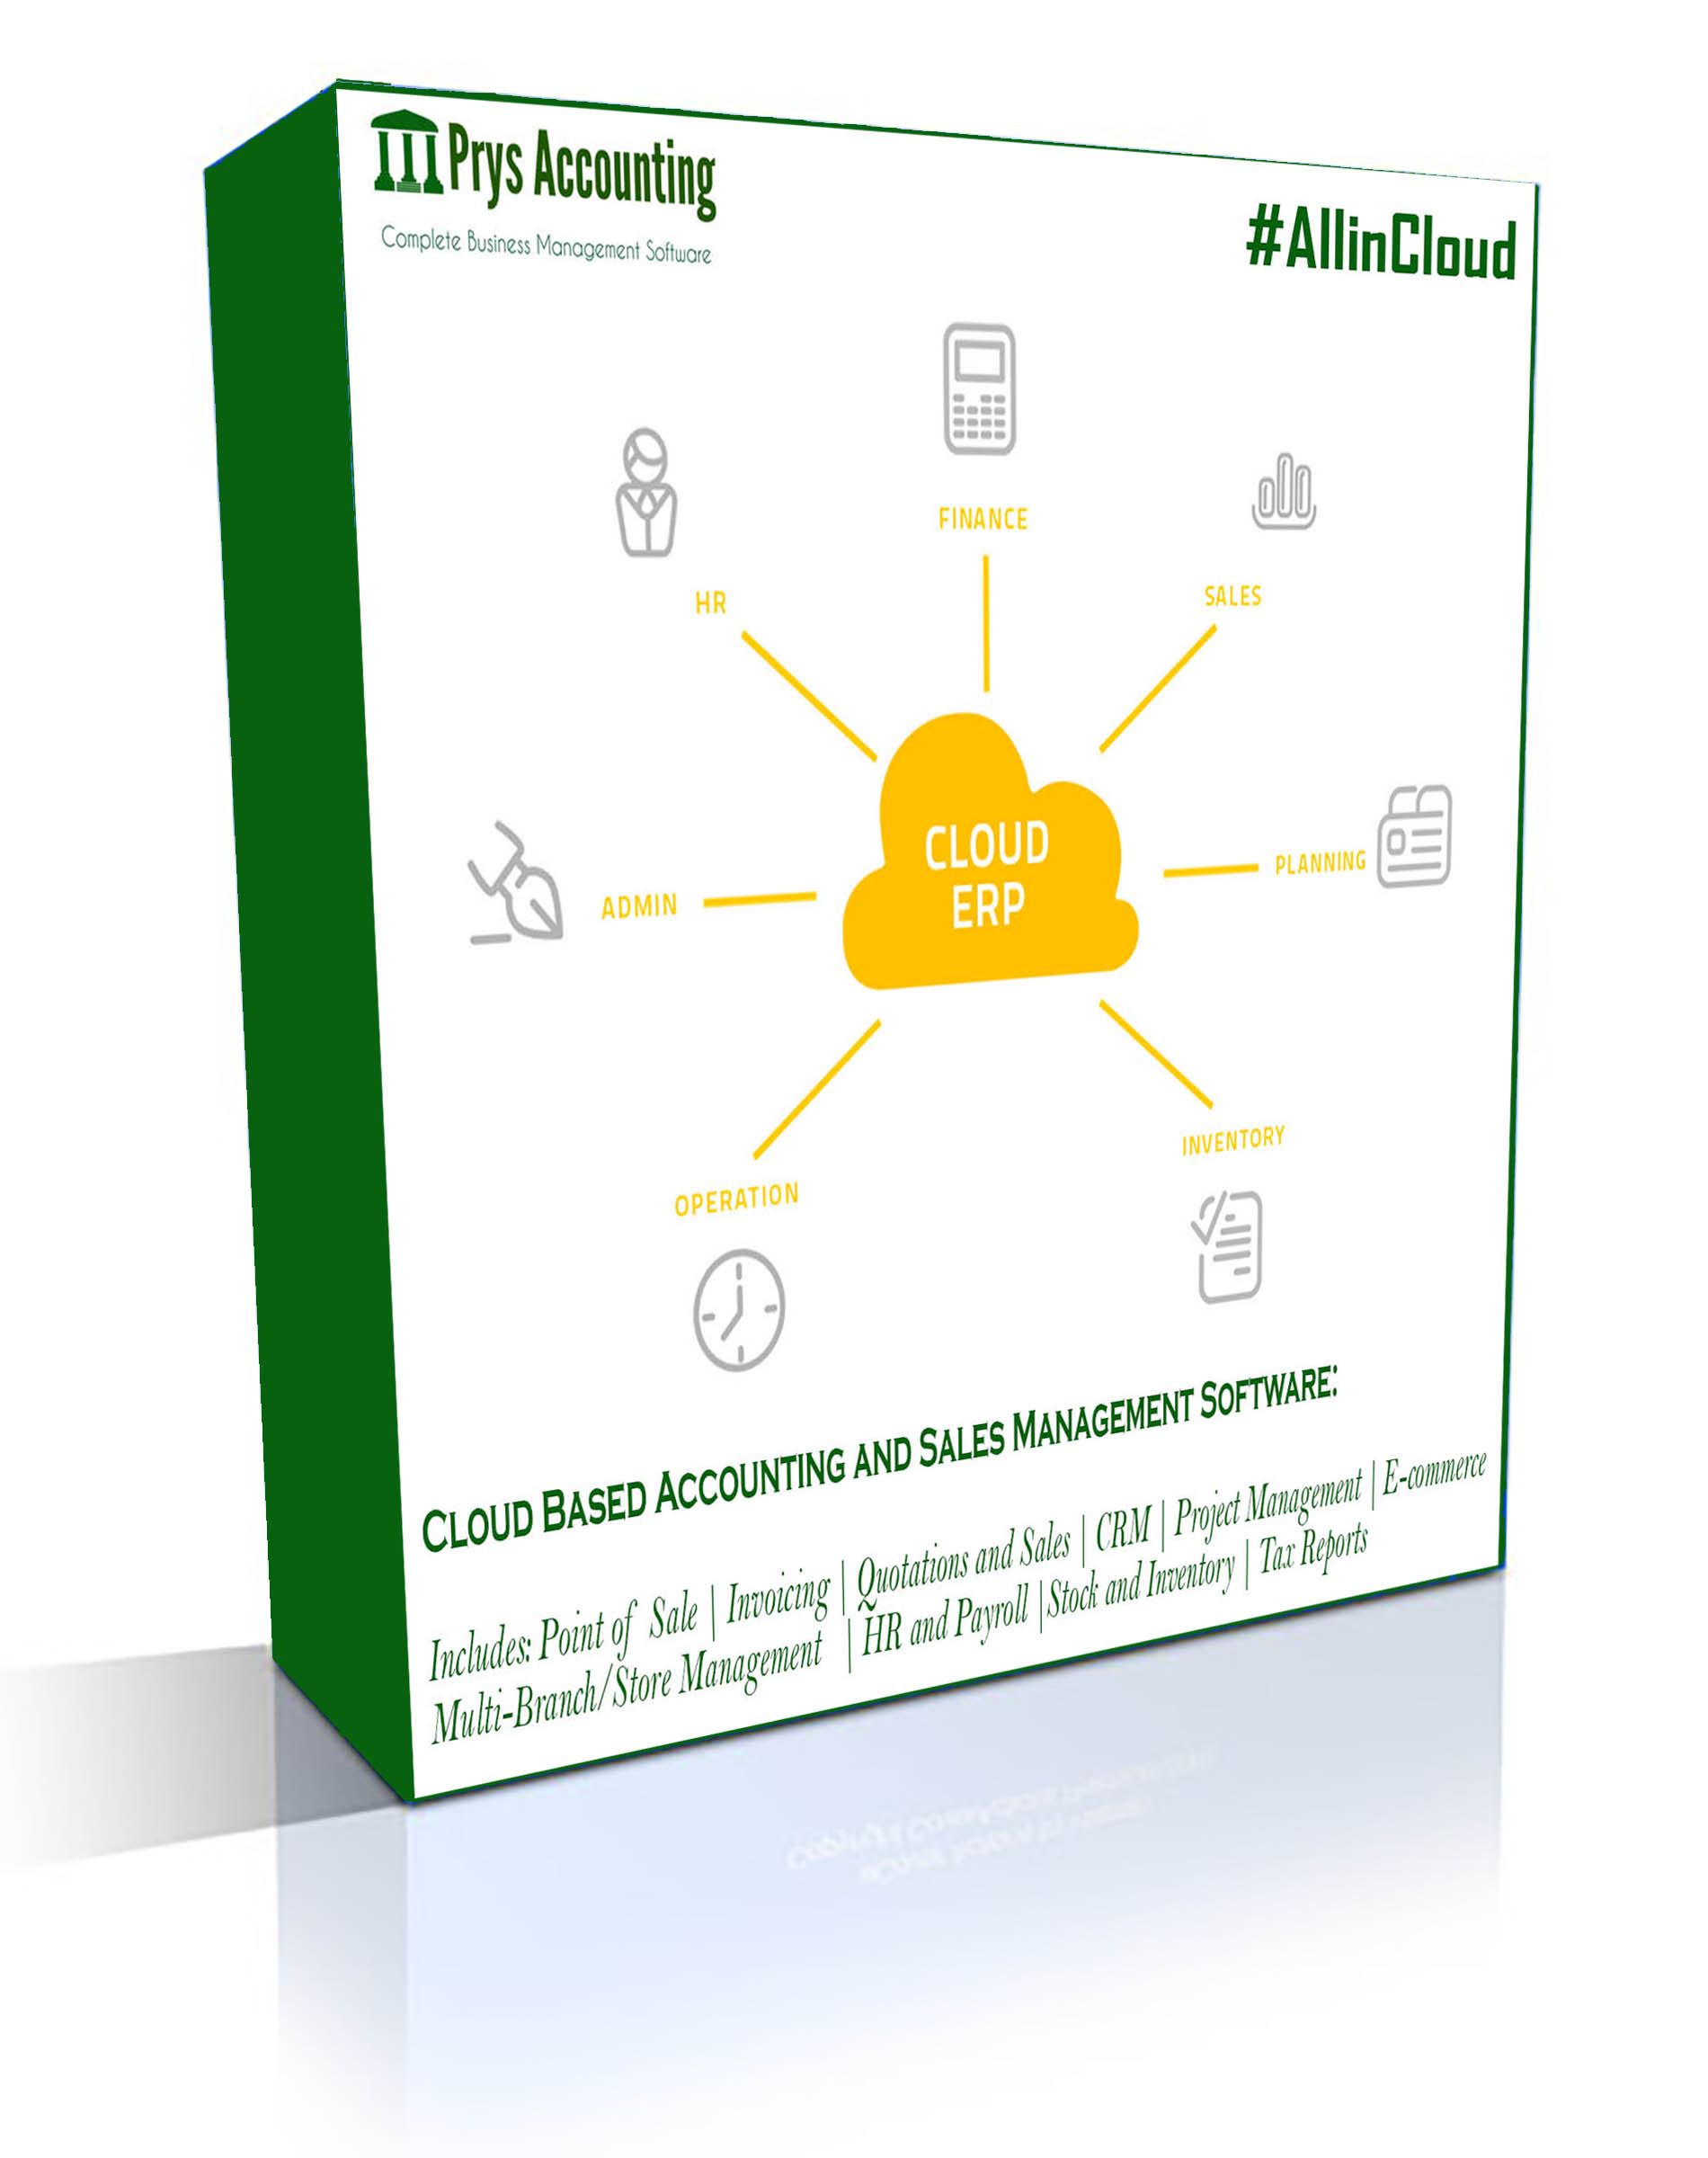 Cloud Accounting Software #AllinCloud (Annual Subscrition)